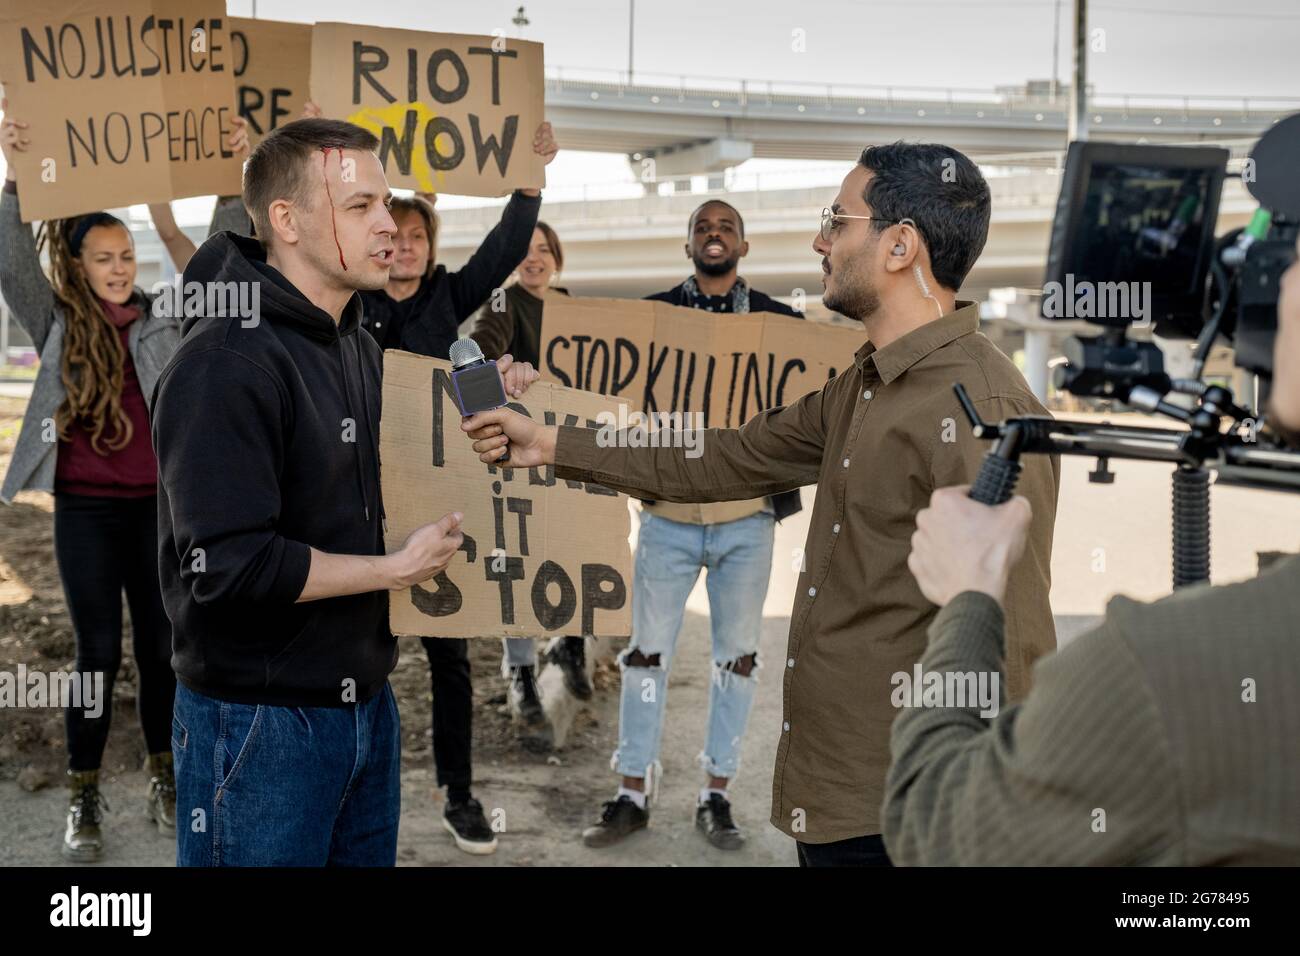 Young male rebel with broken head giving interview to Arabian journalist while other protestors waving banners in background Stock Photo